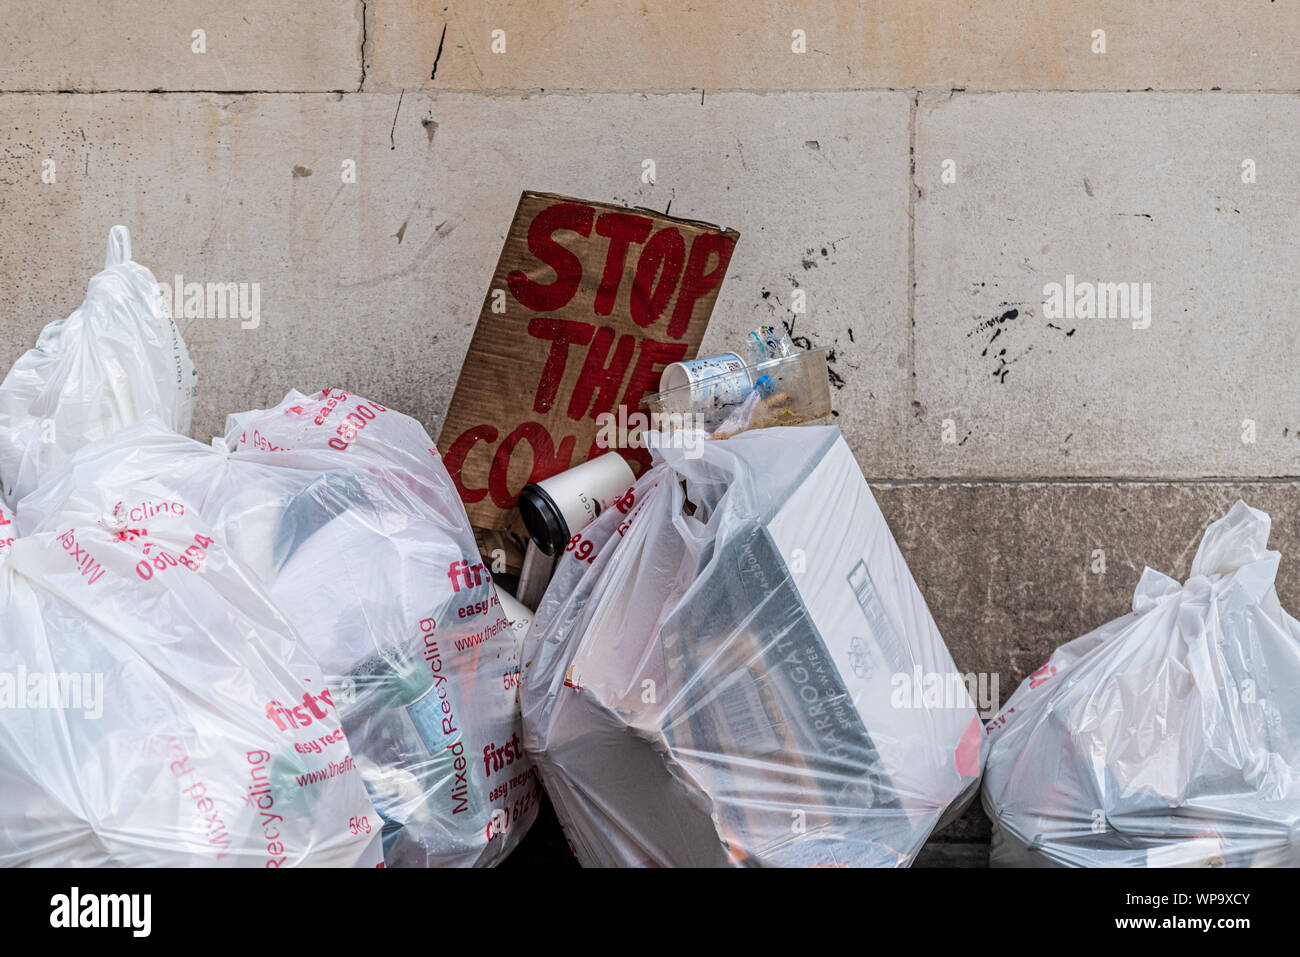 Dumped Stop the Coup placard with waste rubbish on street in Westminster, London, UK after protest against Brexit, the UK leaving the European Union Stock Photo